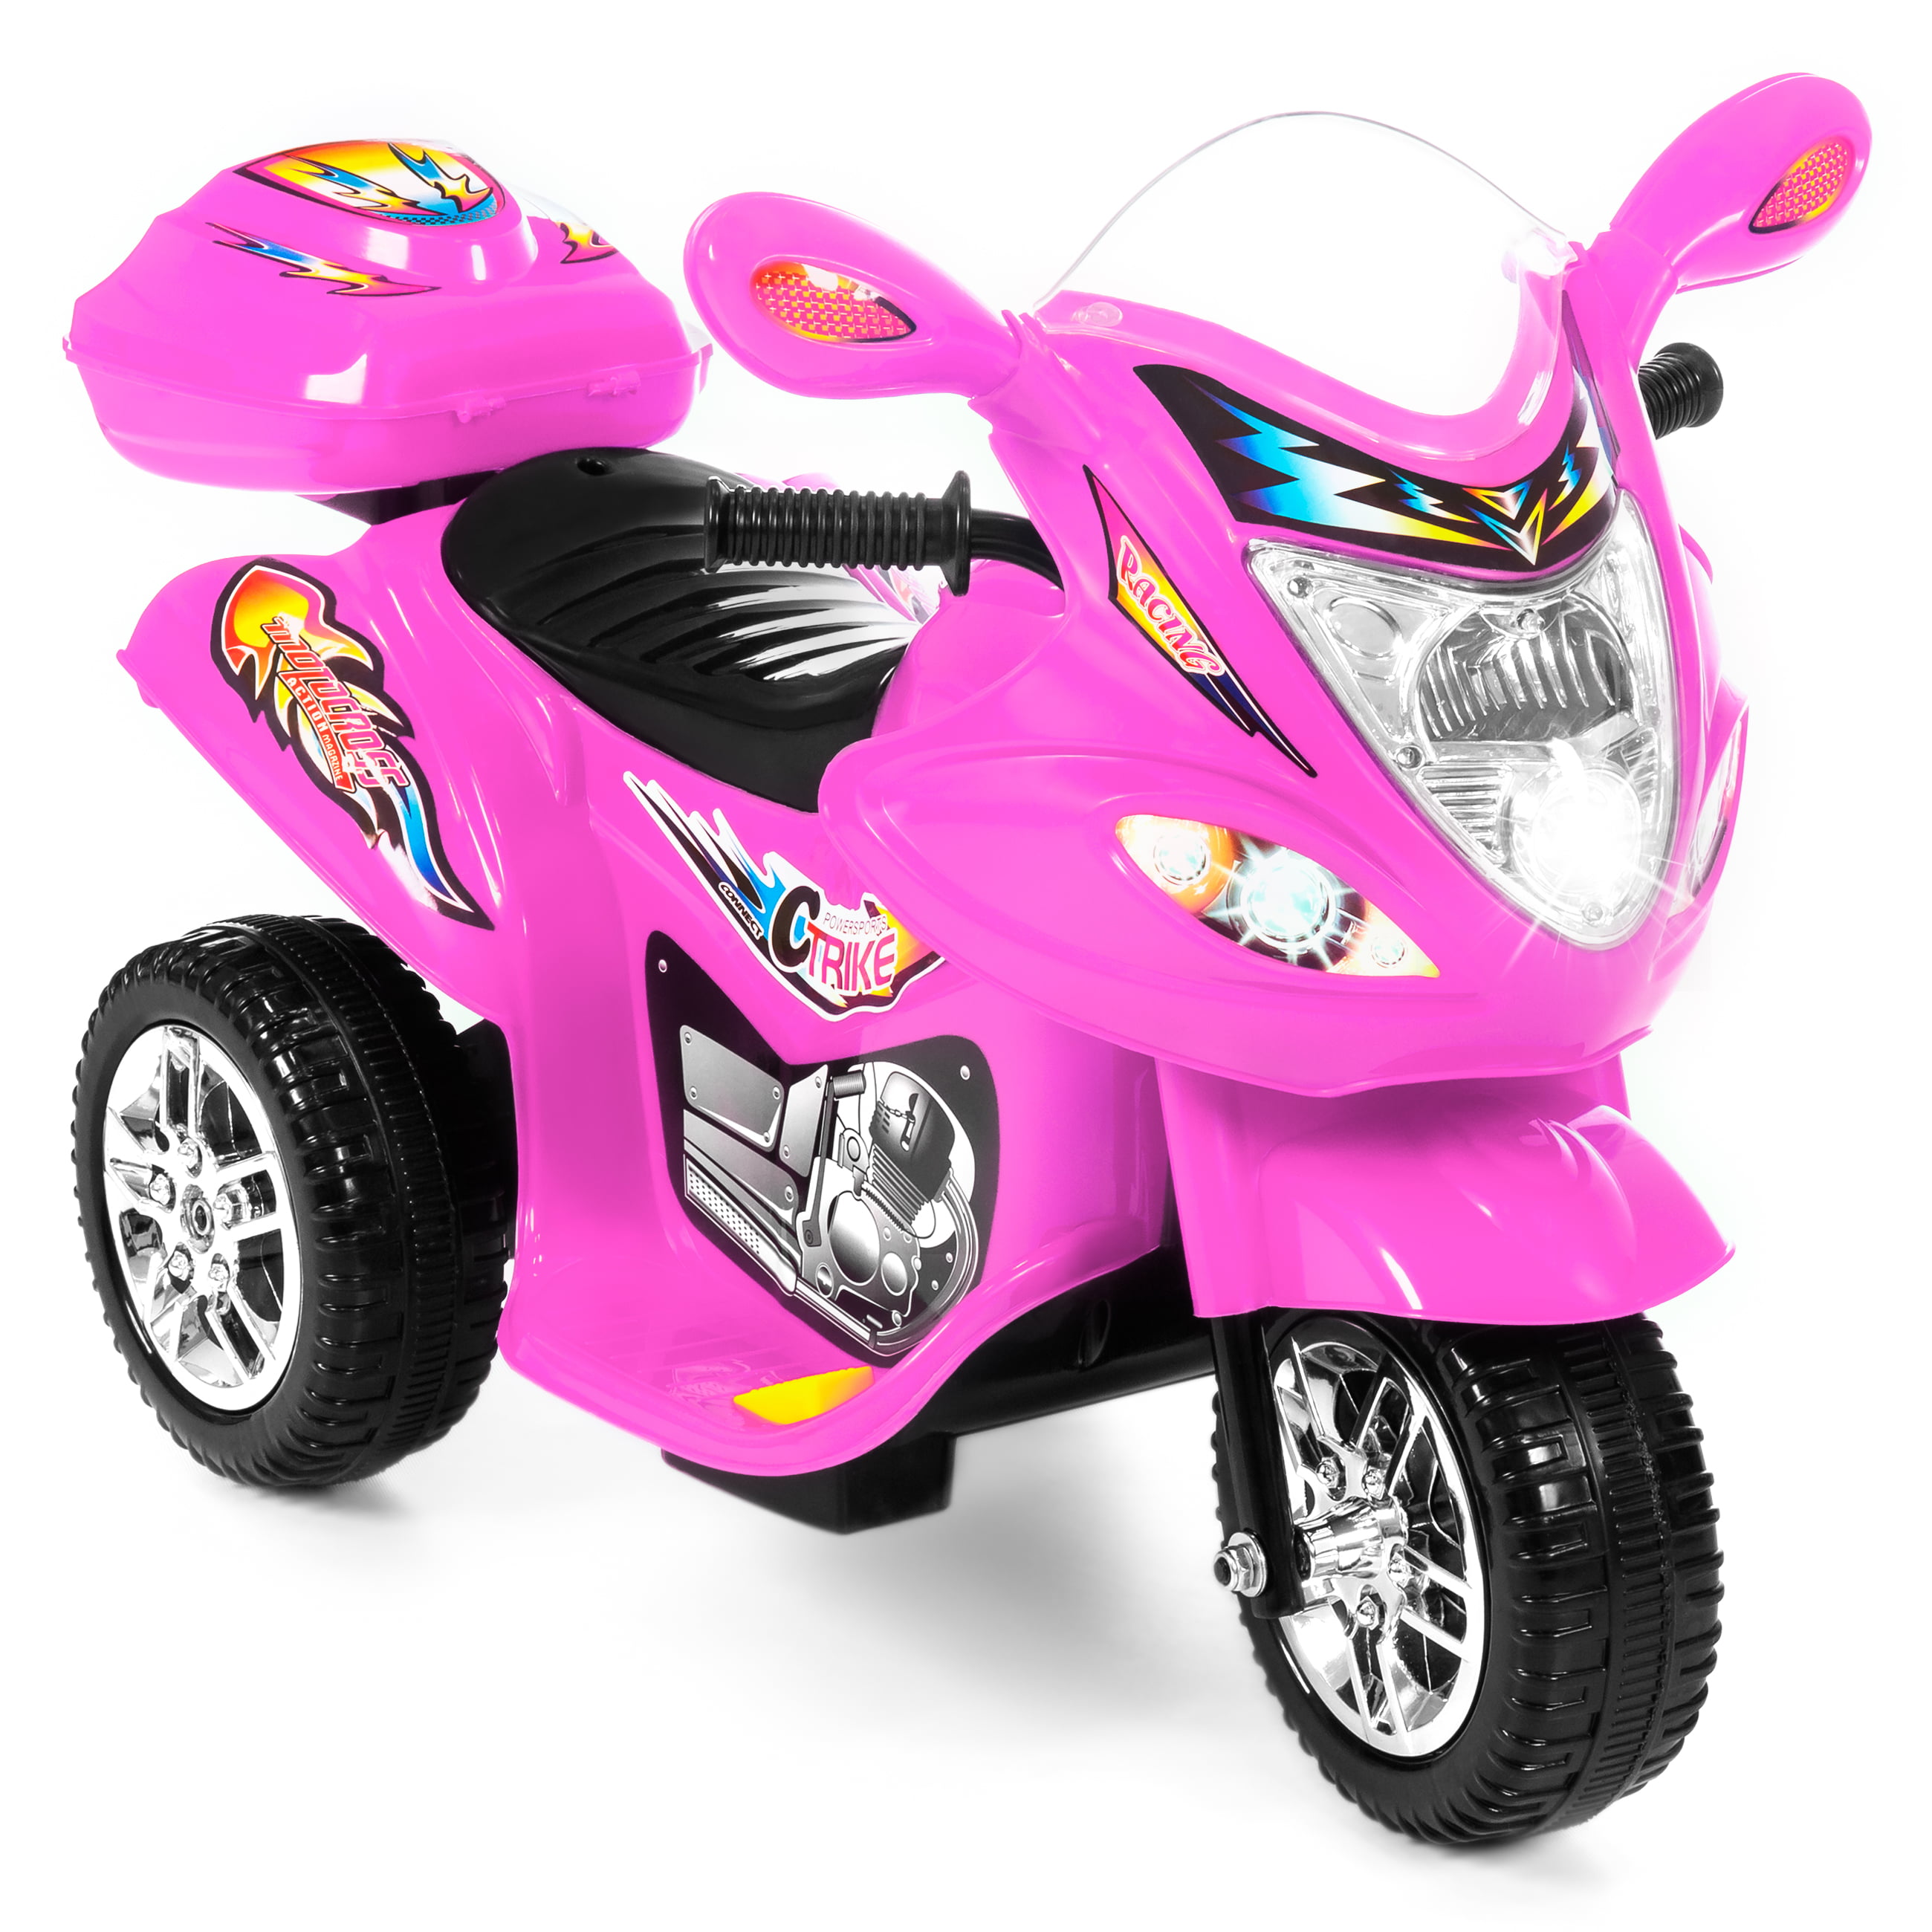 Best Choice Products 6V Kids Battery Powered 3-Wheel Motorcycle Ride On